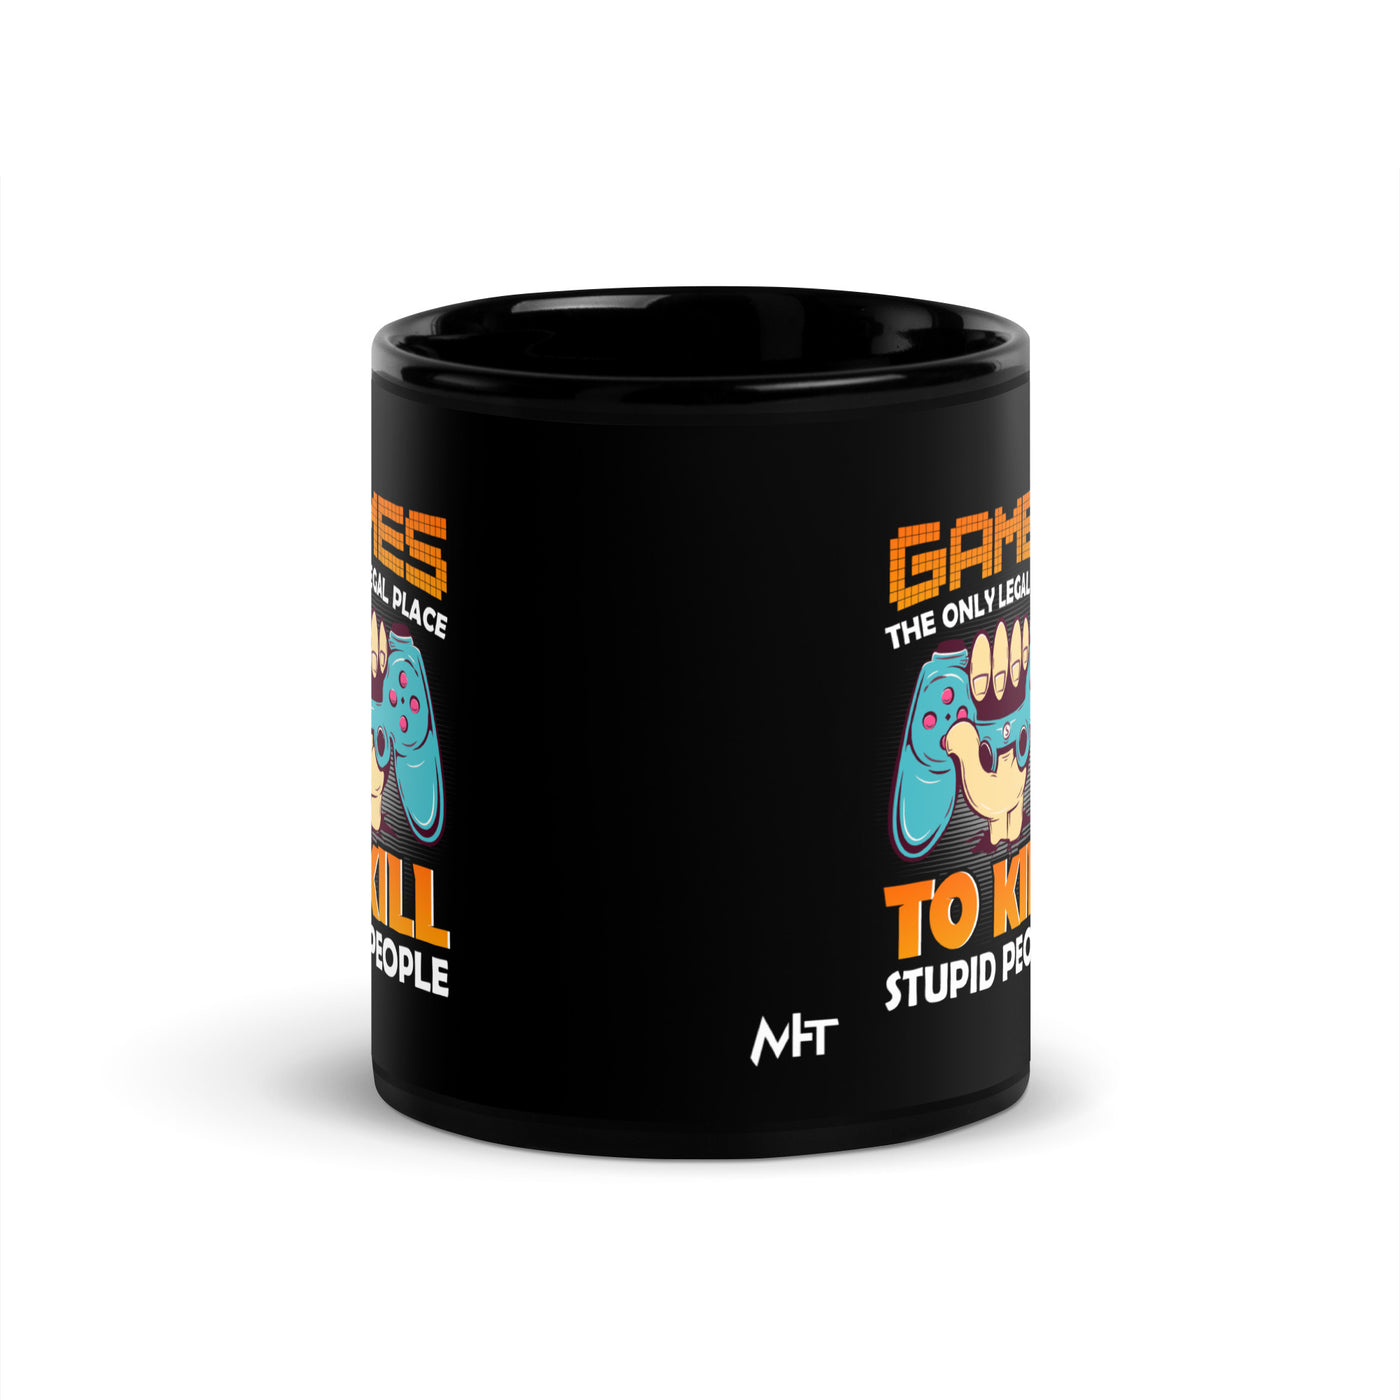 Games: the Only legal place to Kill Stupid People ( orange text ) - Black Glossy Mug